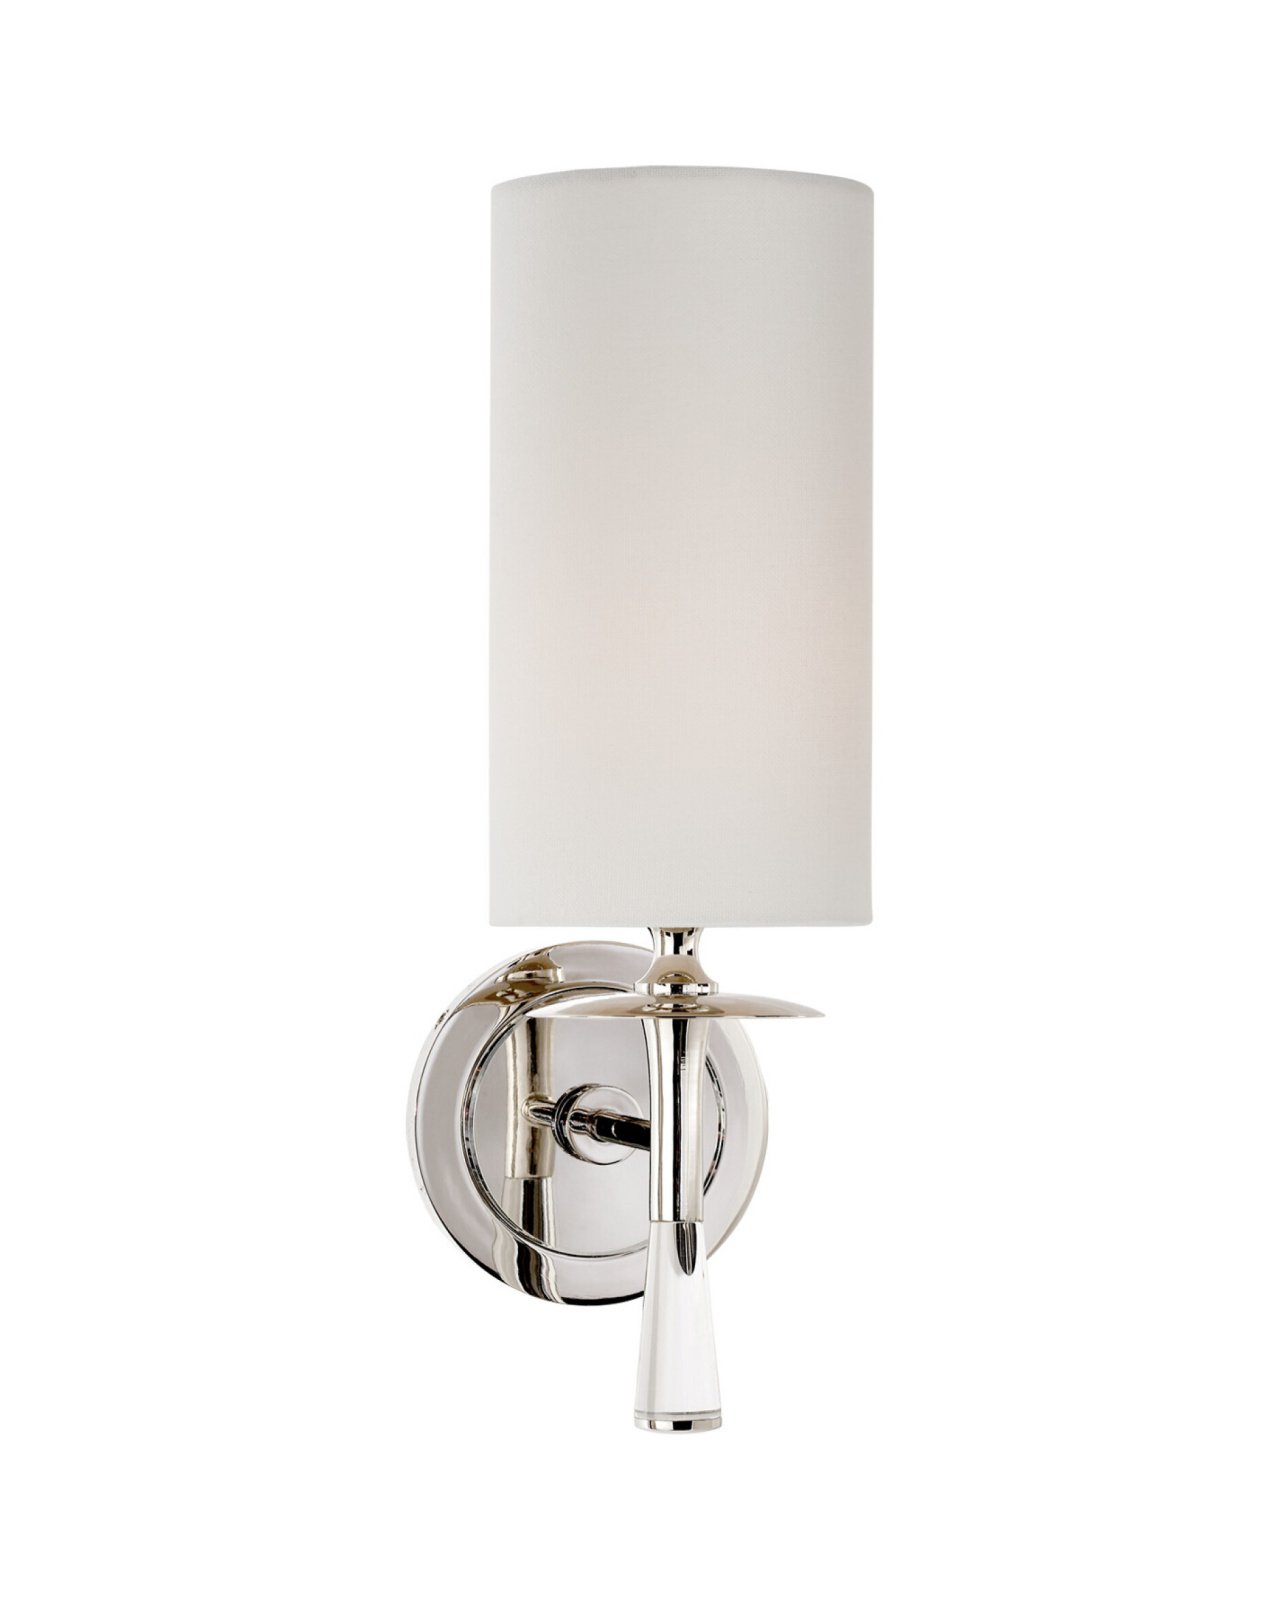 Drunmore Single Sconce Polished Nickel and Crystal/Linen